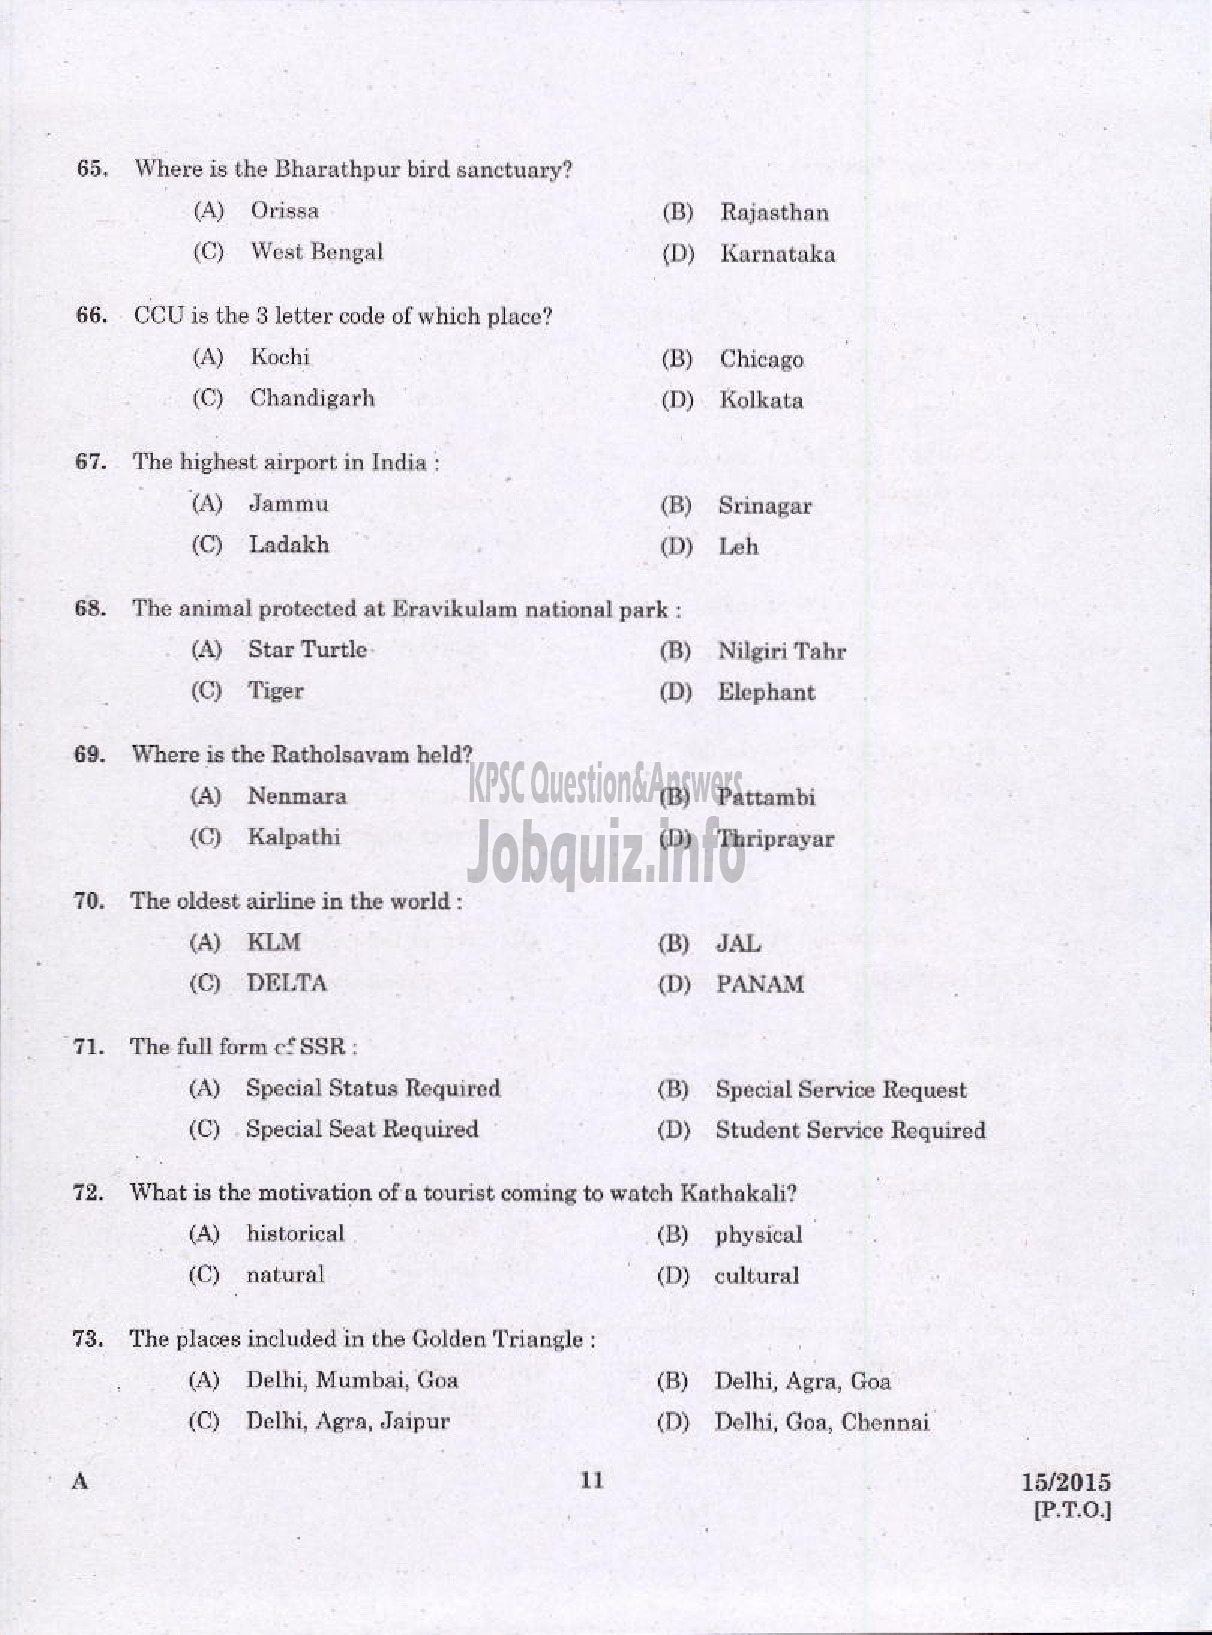 Kerala PSC Question Paper - LABORATORY TECHNICAL ASSISTANT TRAVEL AND TOURISM VHSE-9